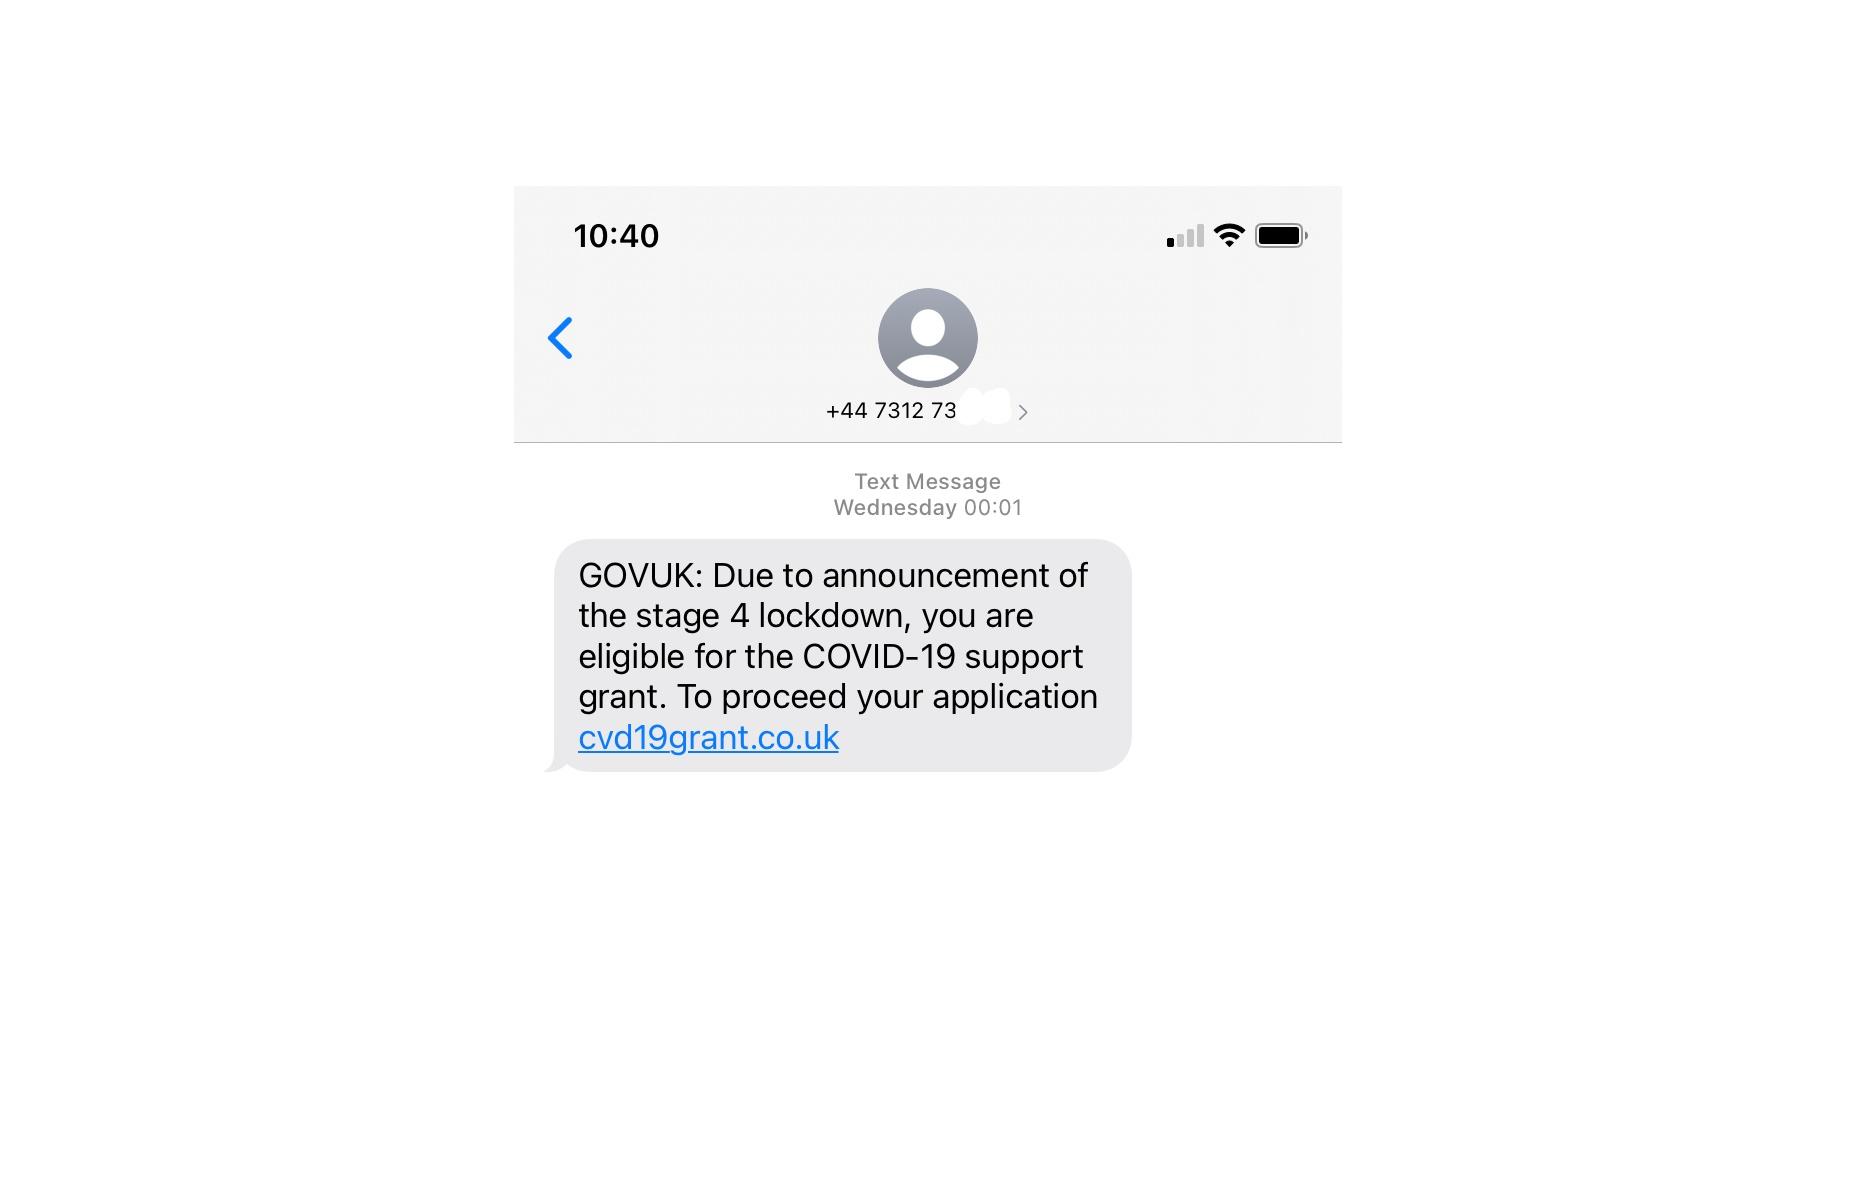 UK government COVID-19 scams